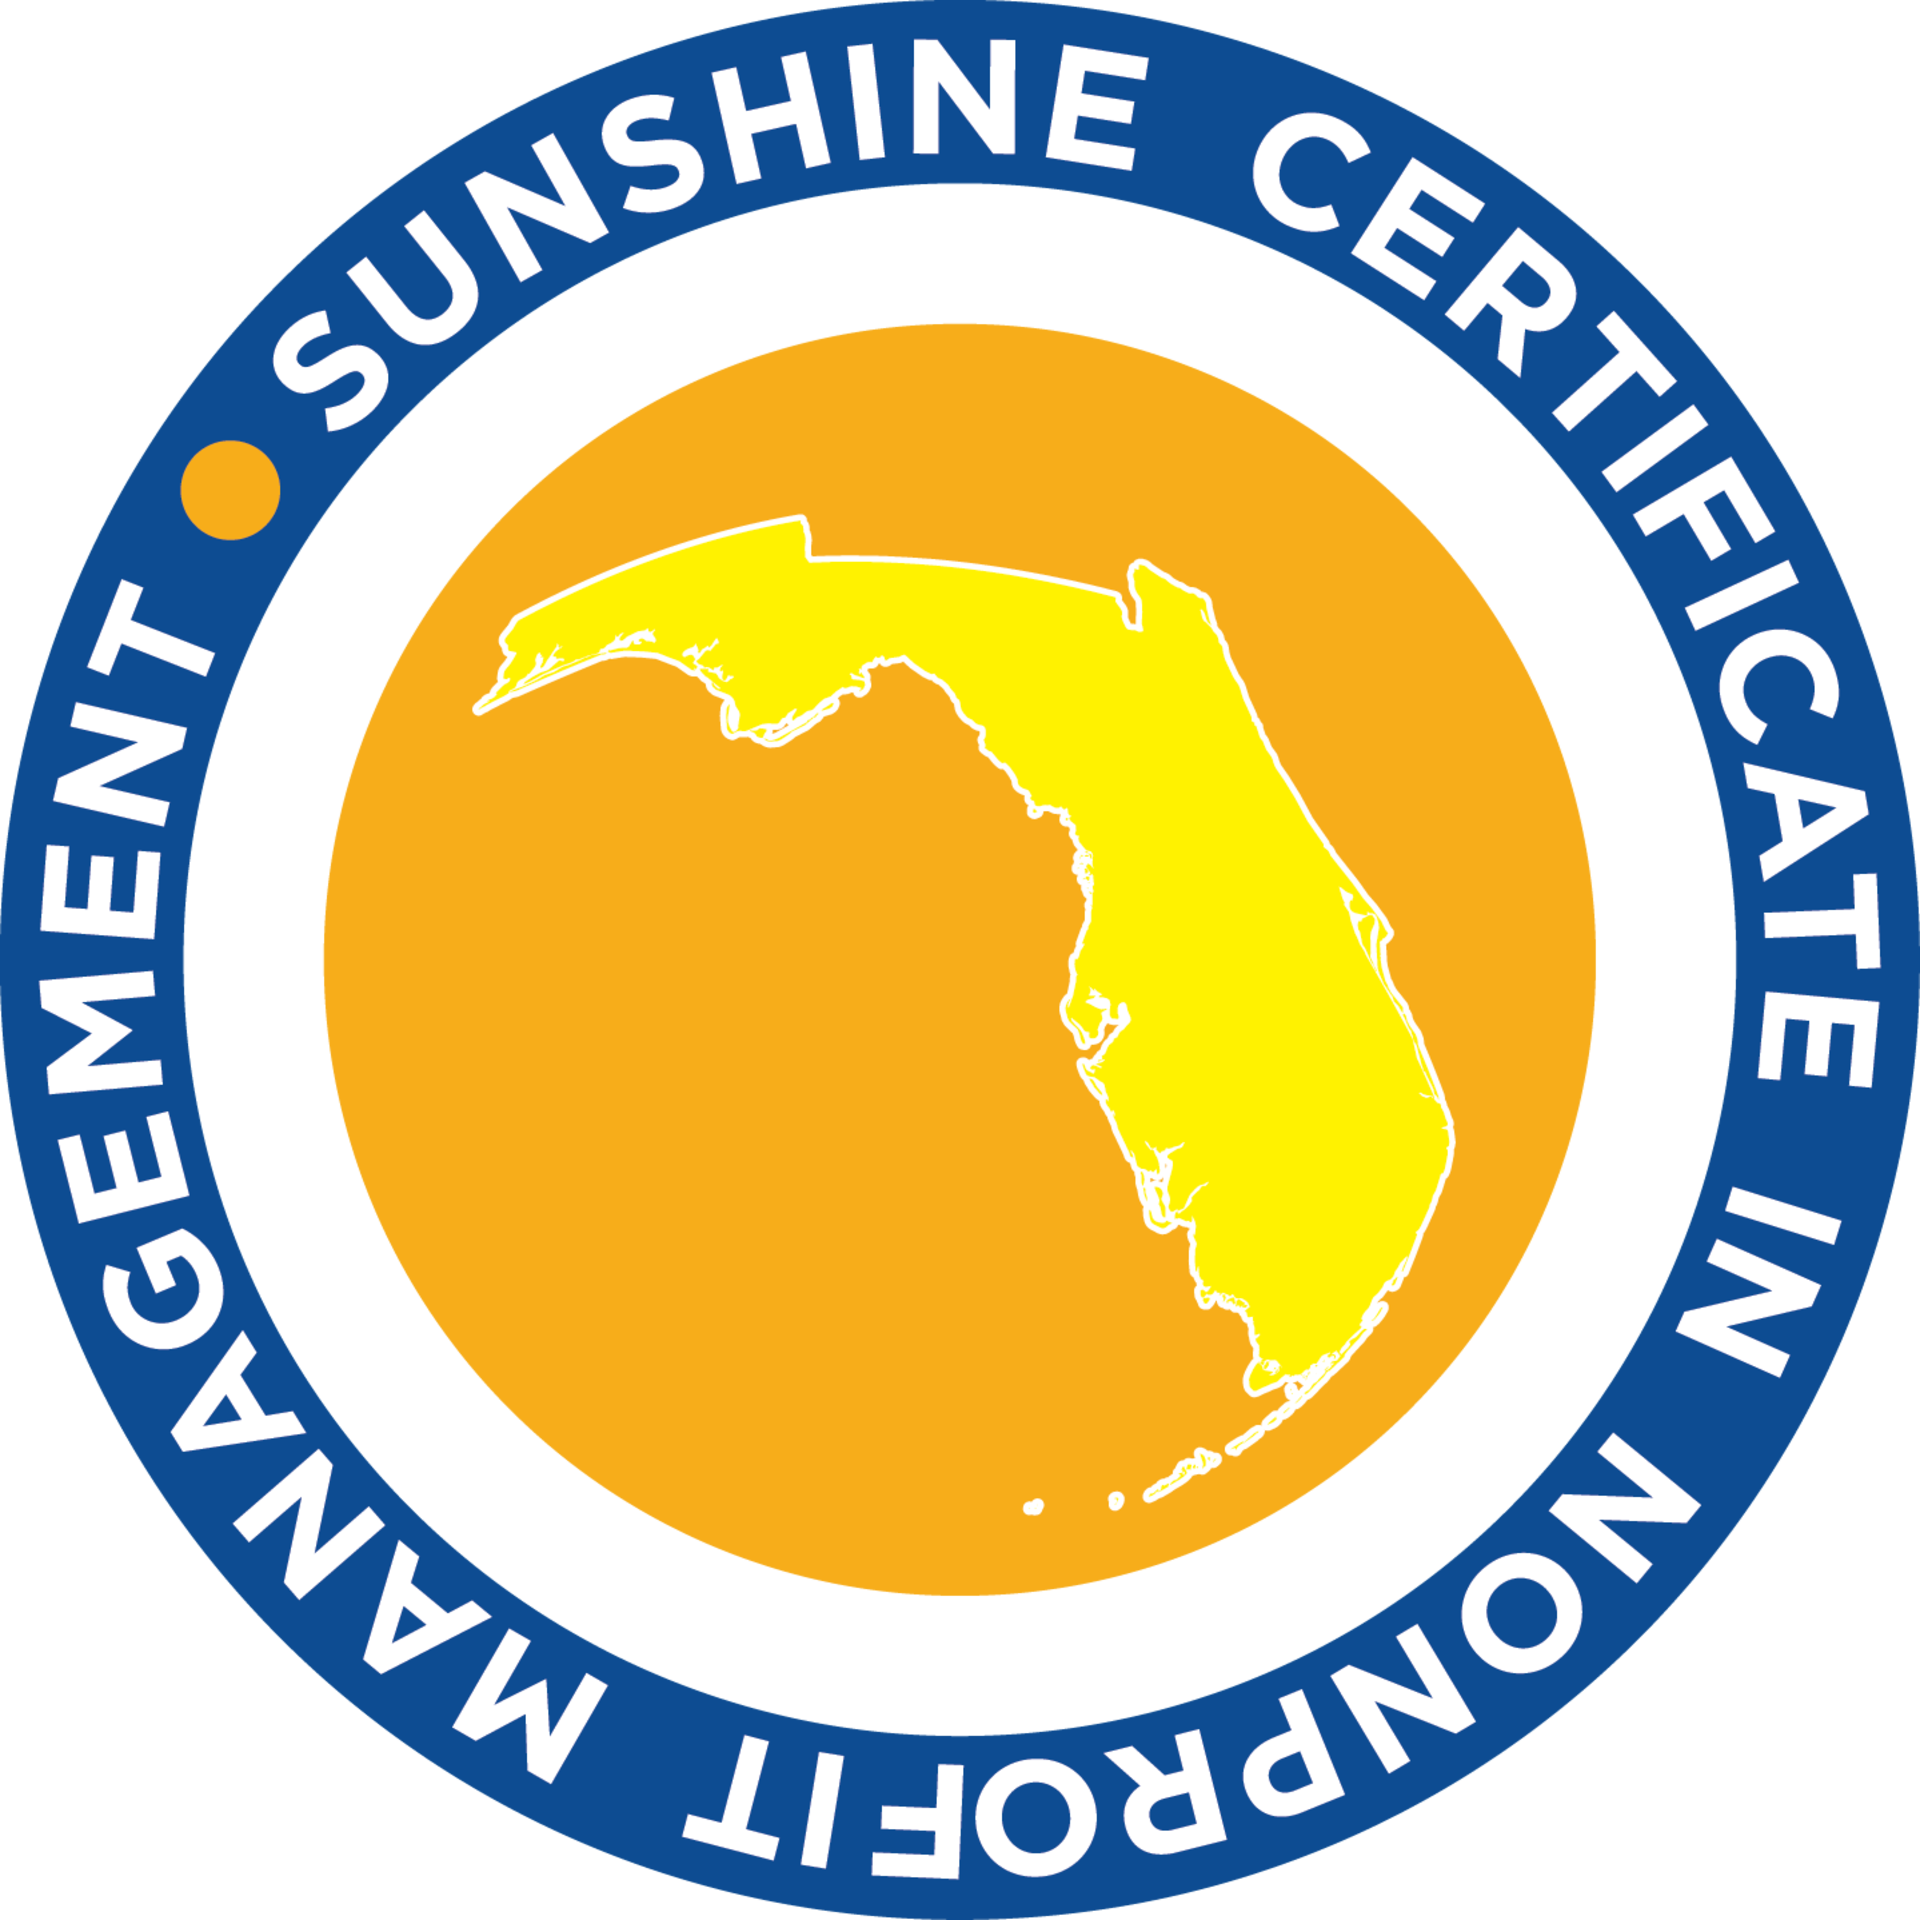  Florida Nonprofits’ Civic Engagement Class of the Sunshine Certificate in...